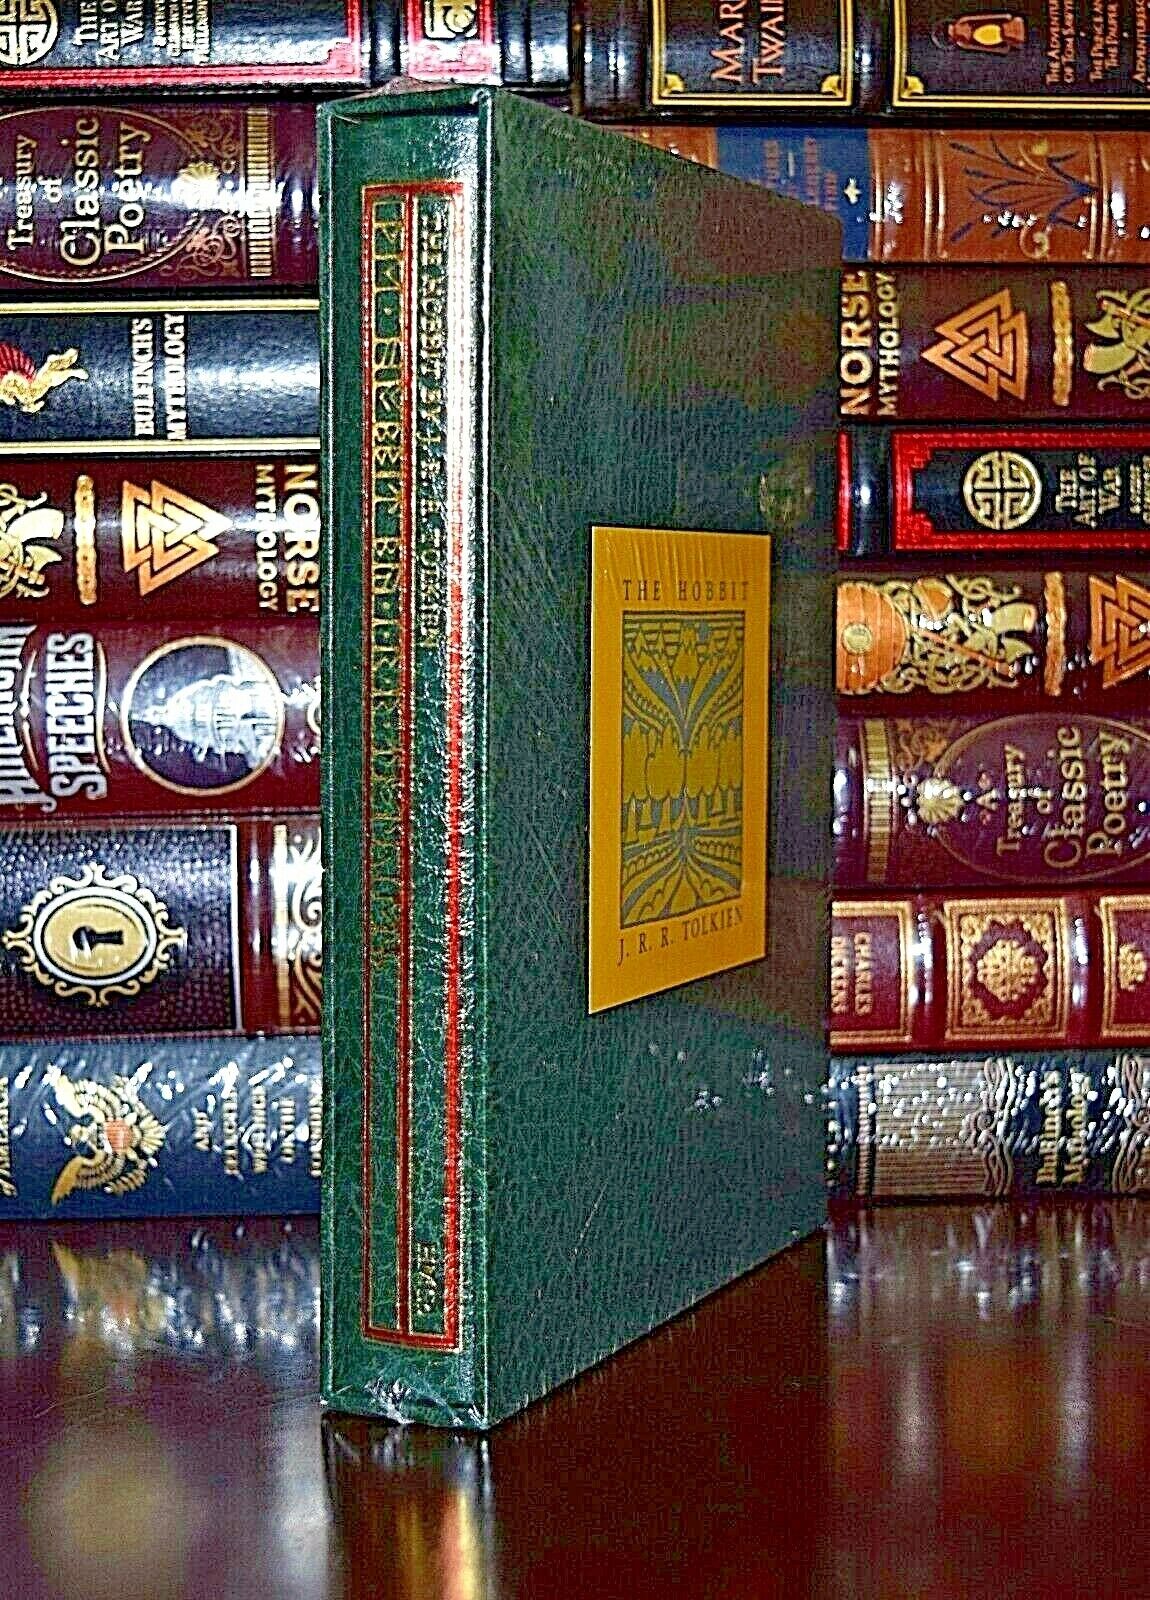 New Hobbit by J.R. Tolkien Leather Bound Deluxe Collector's Slipcase Hardcover Без бренда